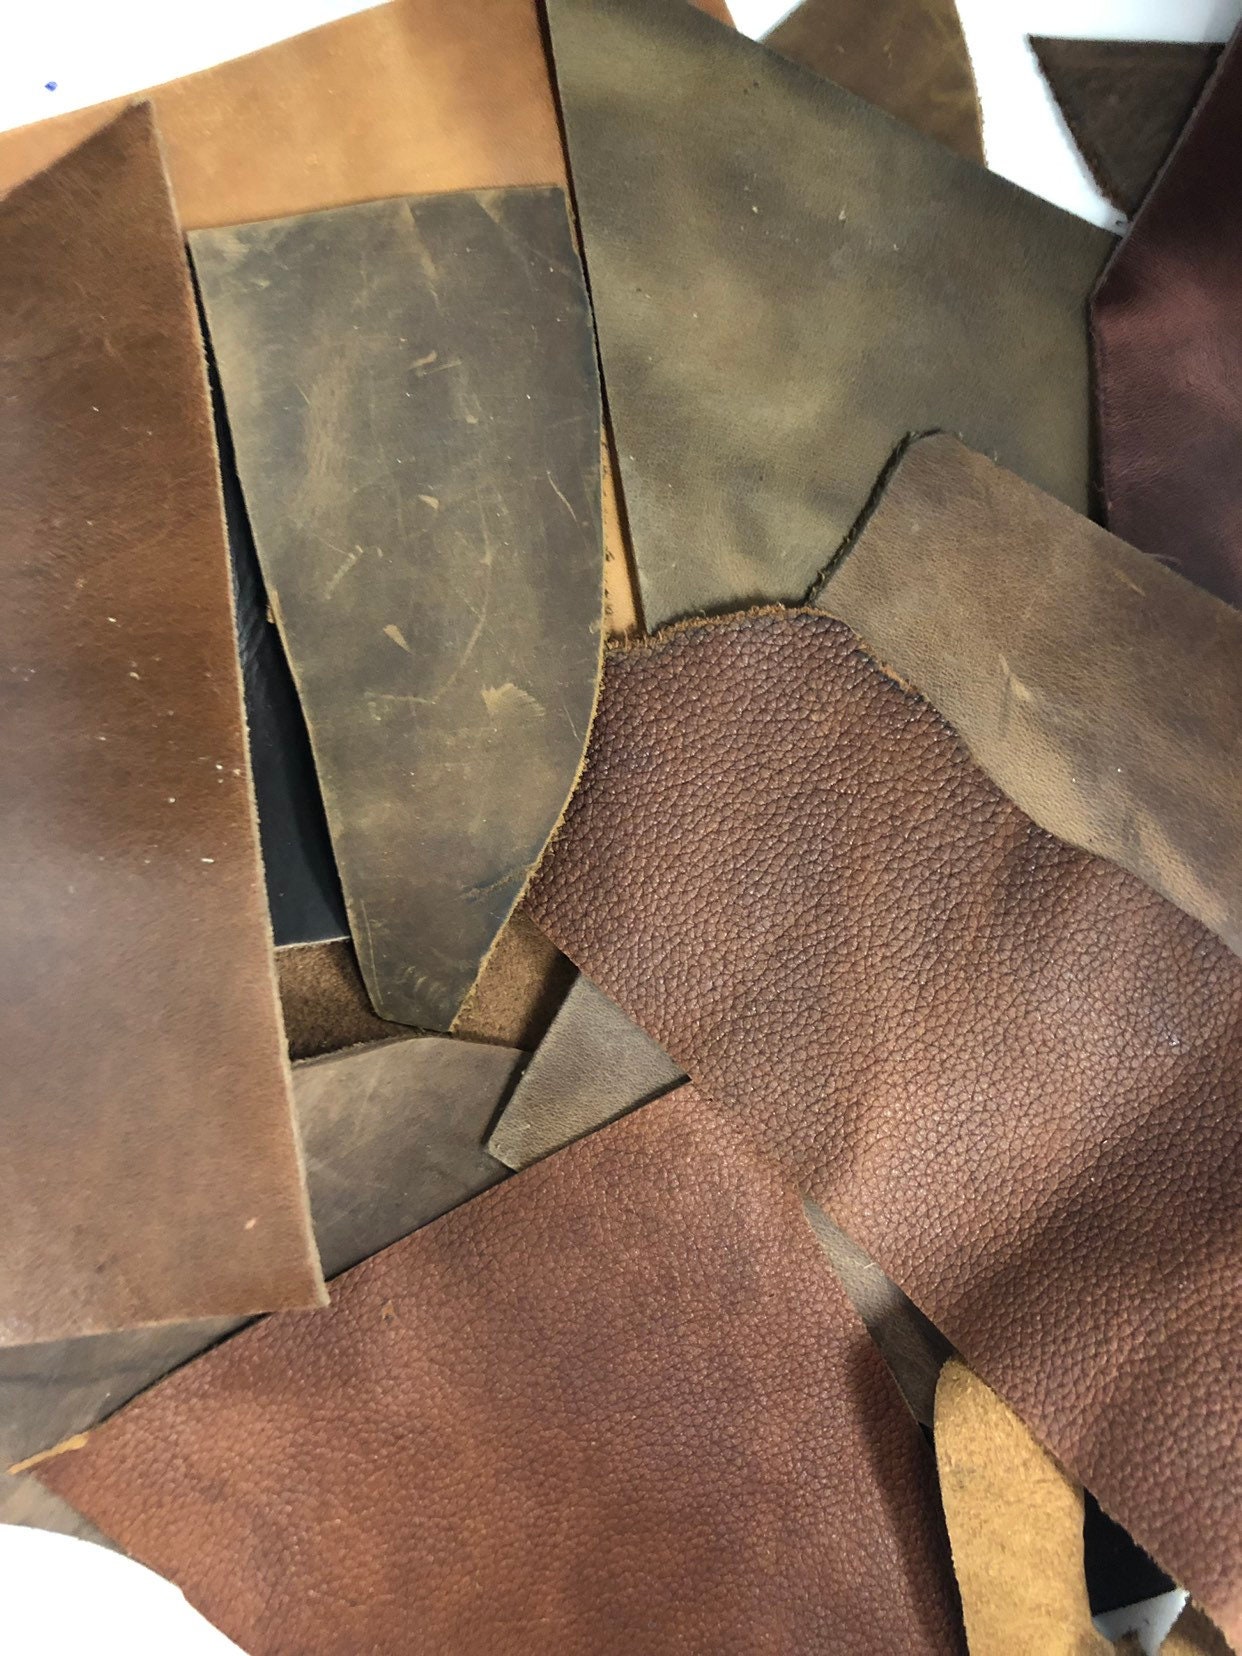 Sale 1 Lb Sm-med Brown Scrap Leather Pieces for Jewelry,leather Remnants,leather  Scraps for Crafts,scrap Leather for Purses,leather Destash 